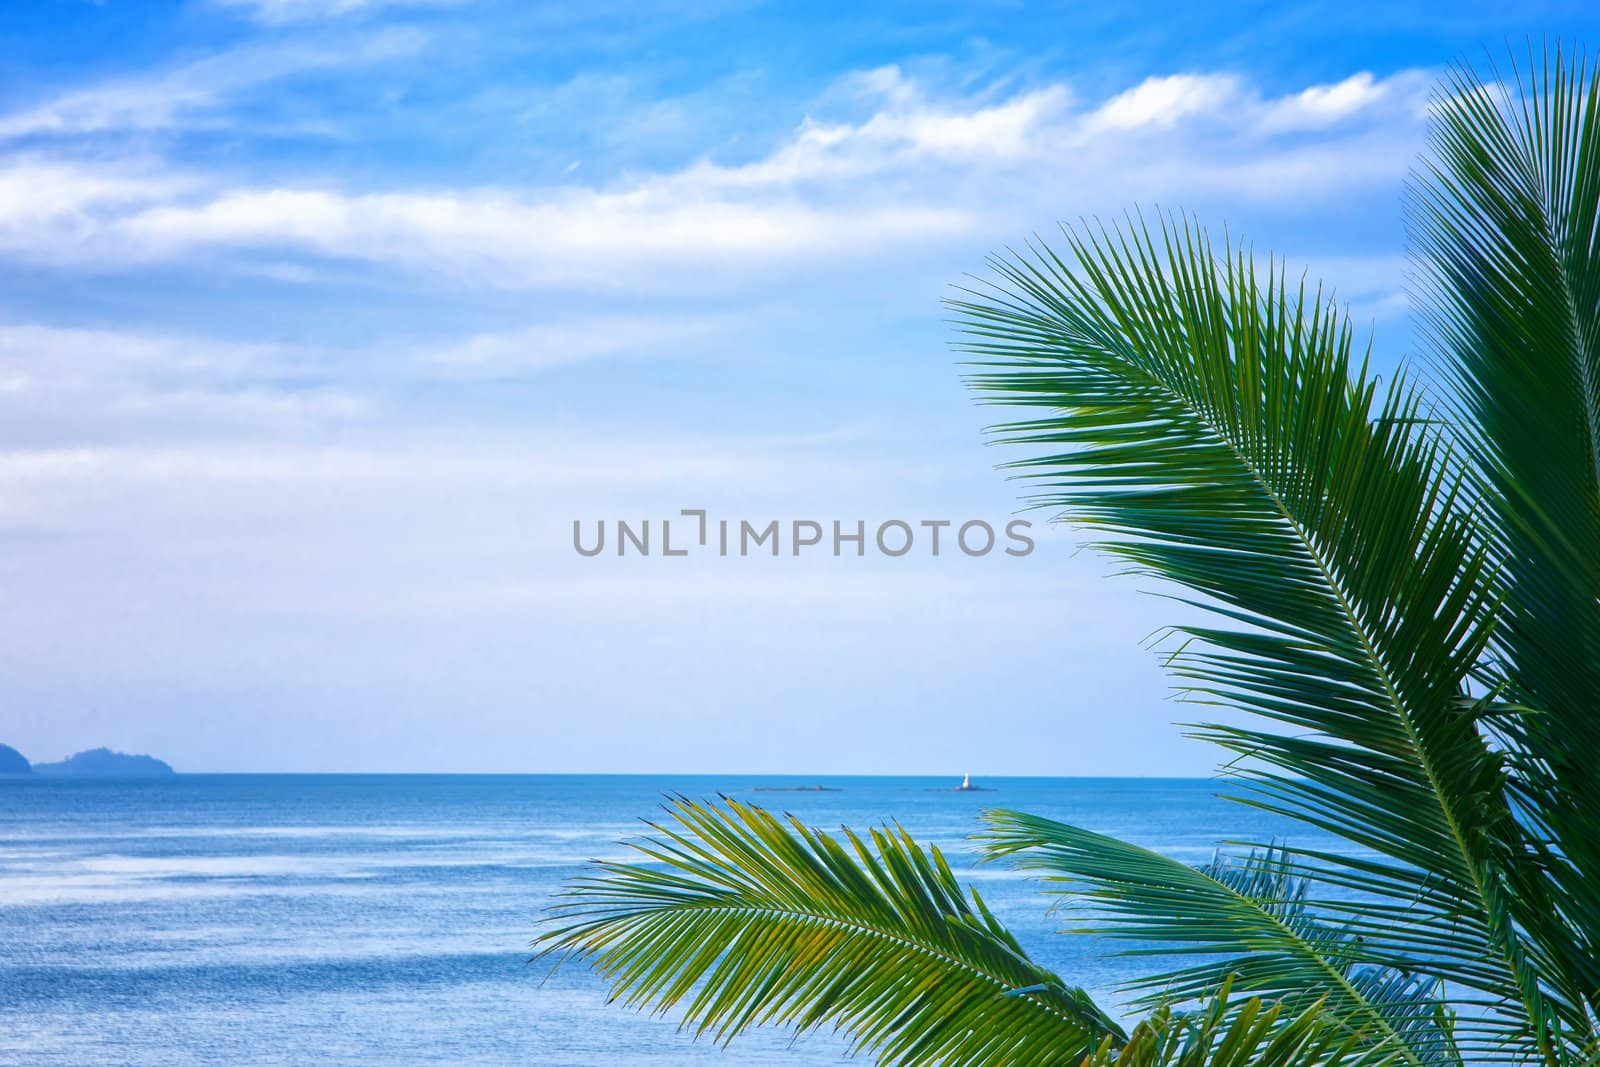 palm trees leaves in front of blue ocean